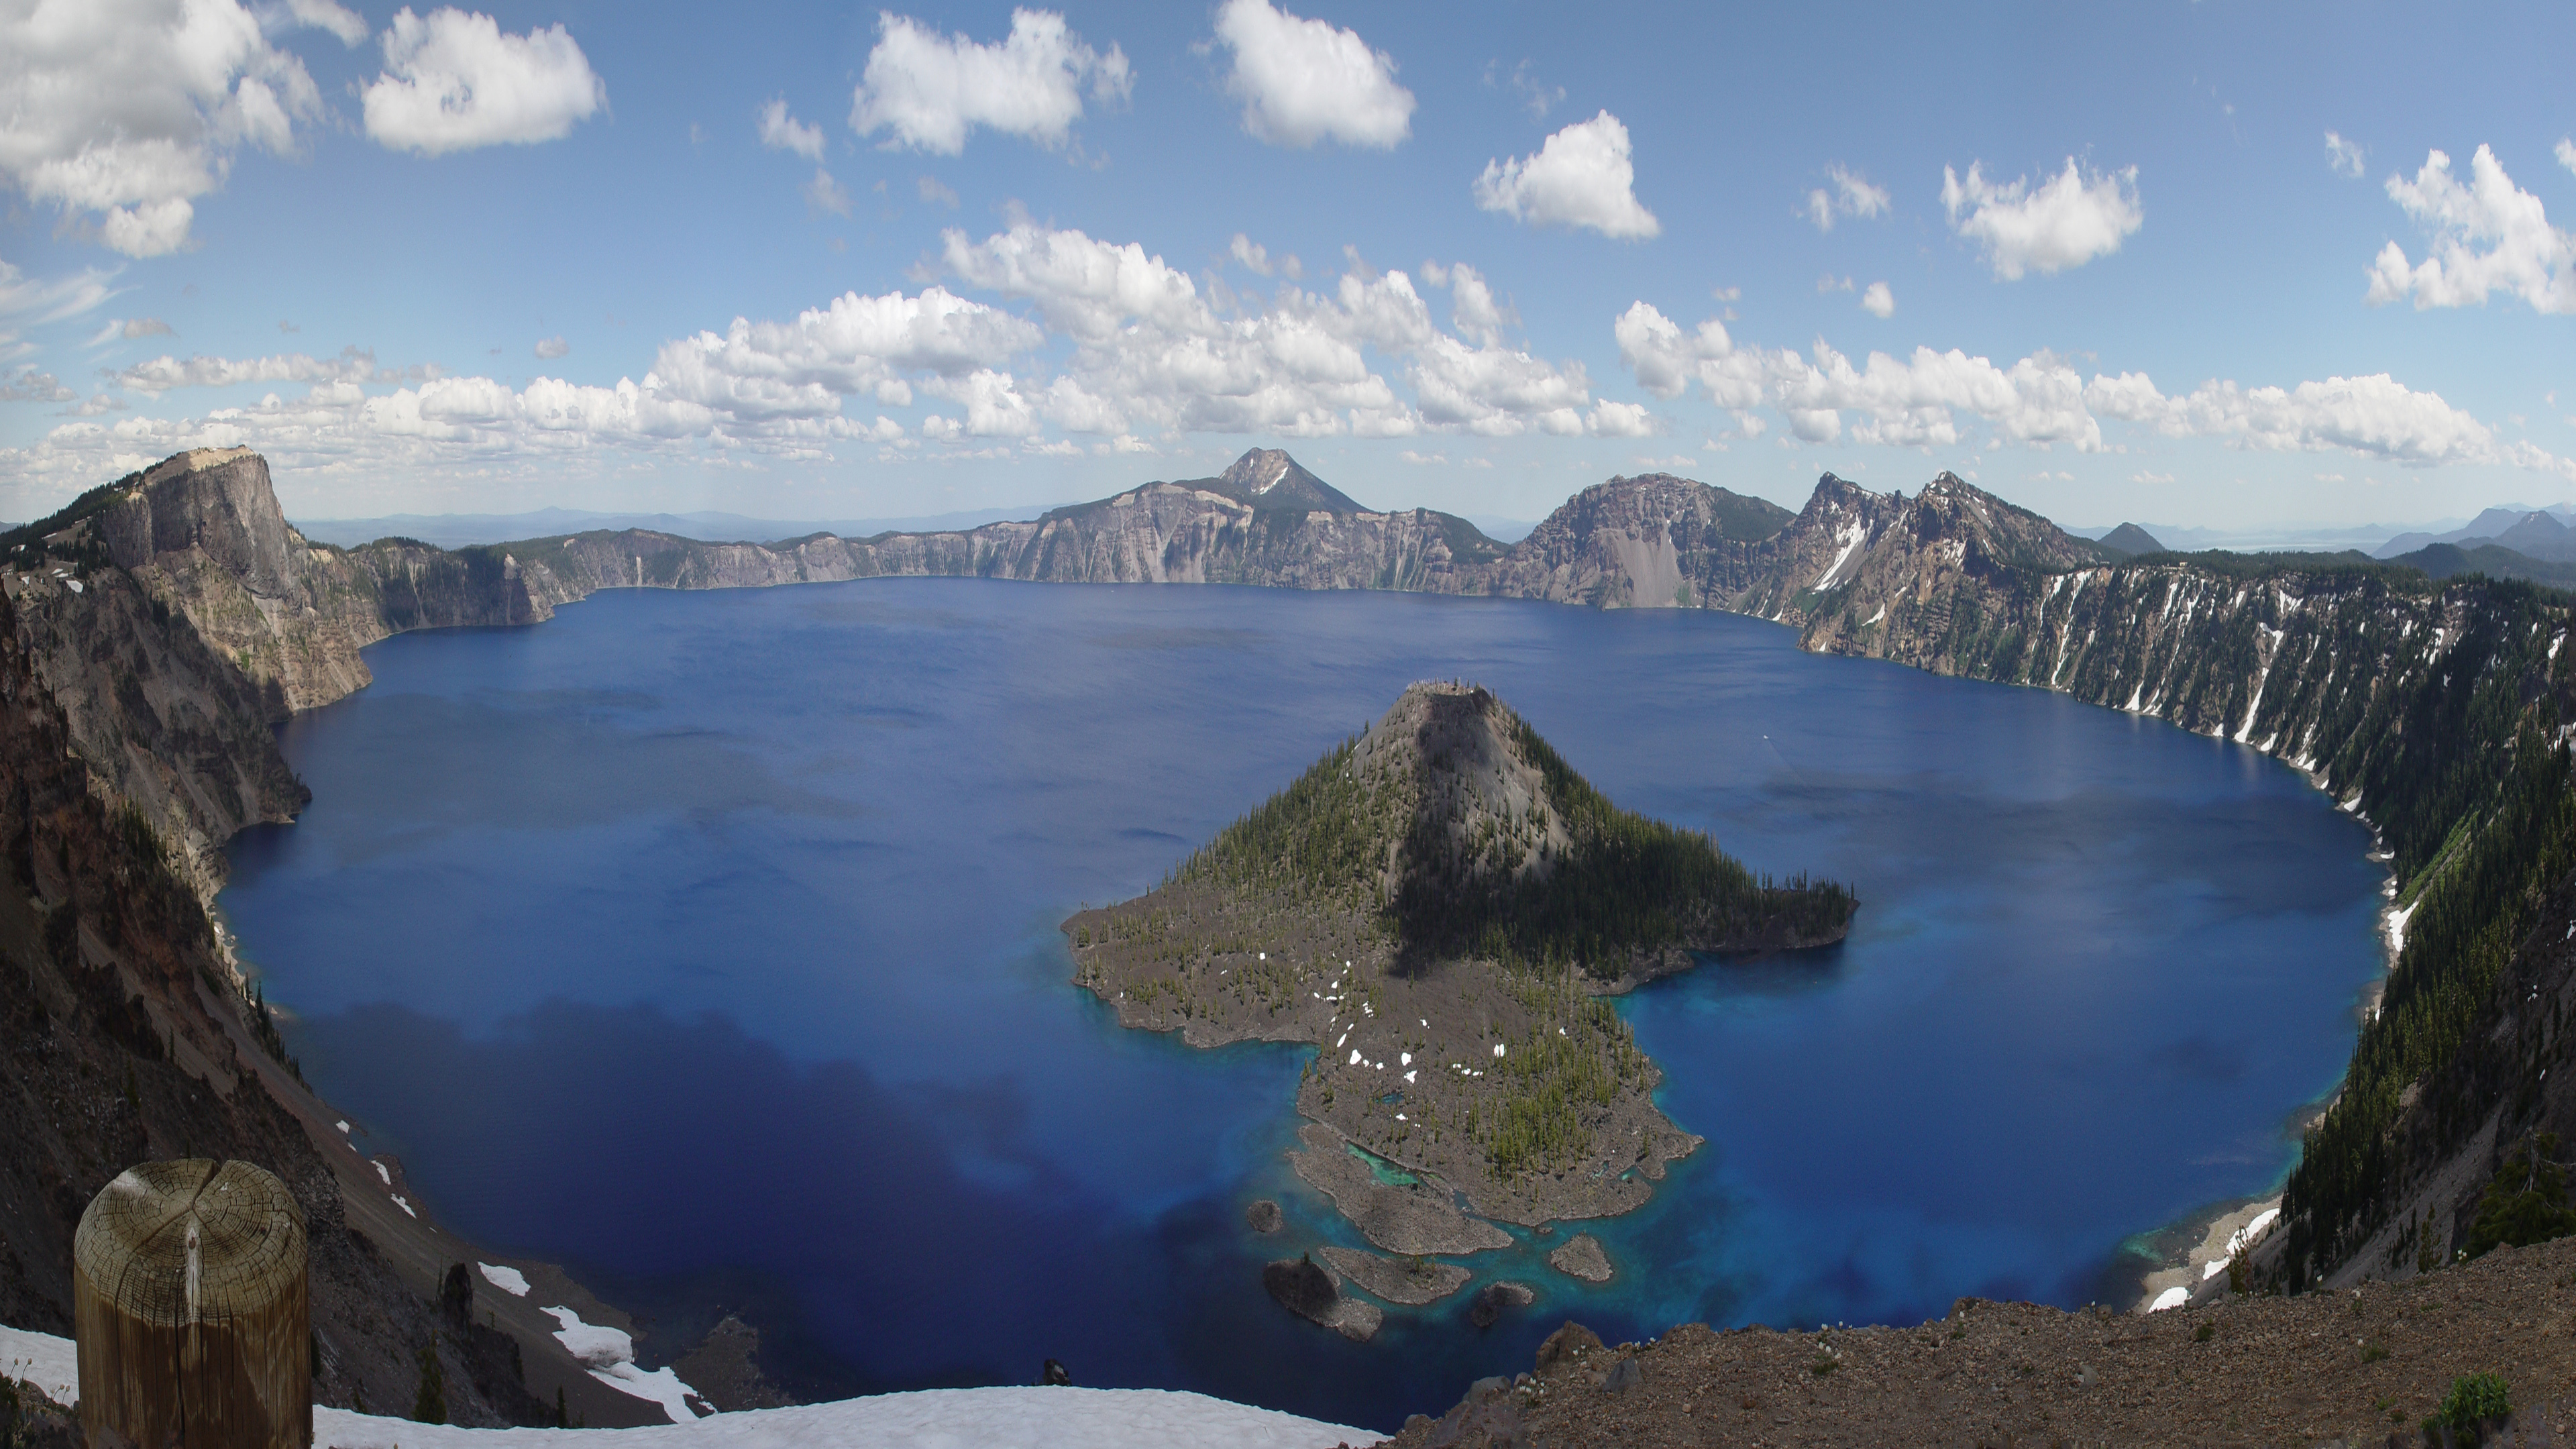 Crater Lake Wallpaper Hd Oregon,united States : Wallpapers13.com